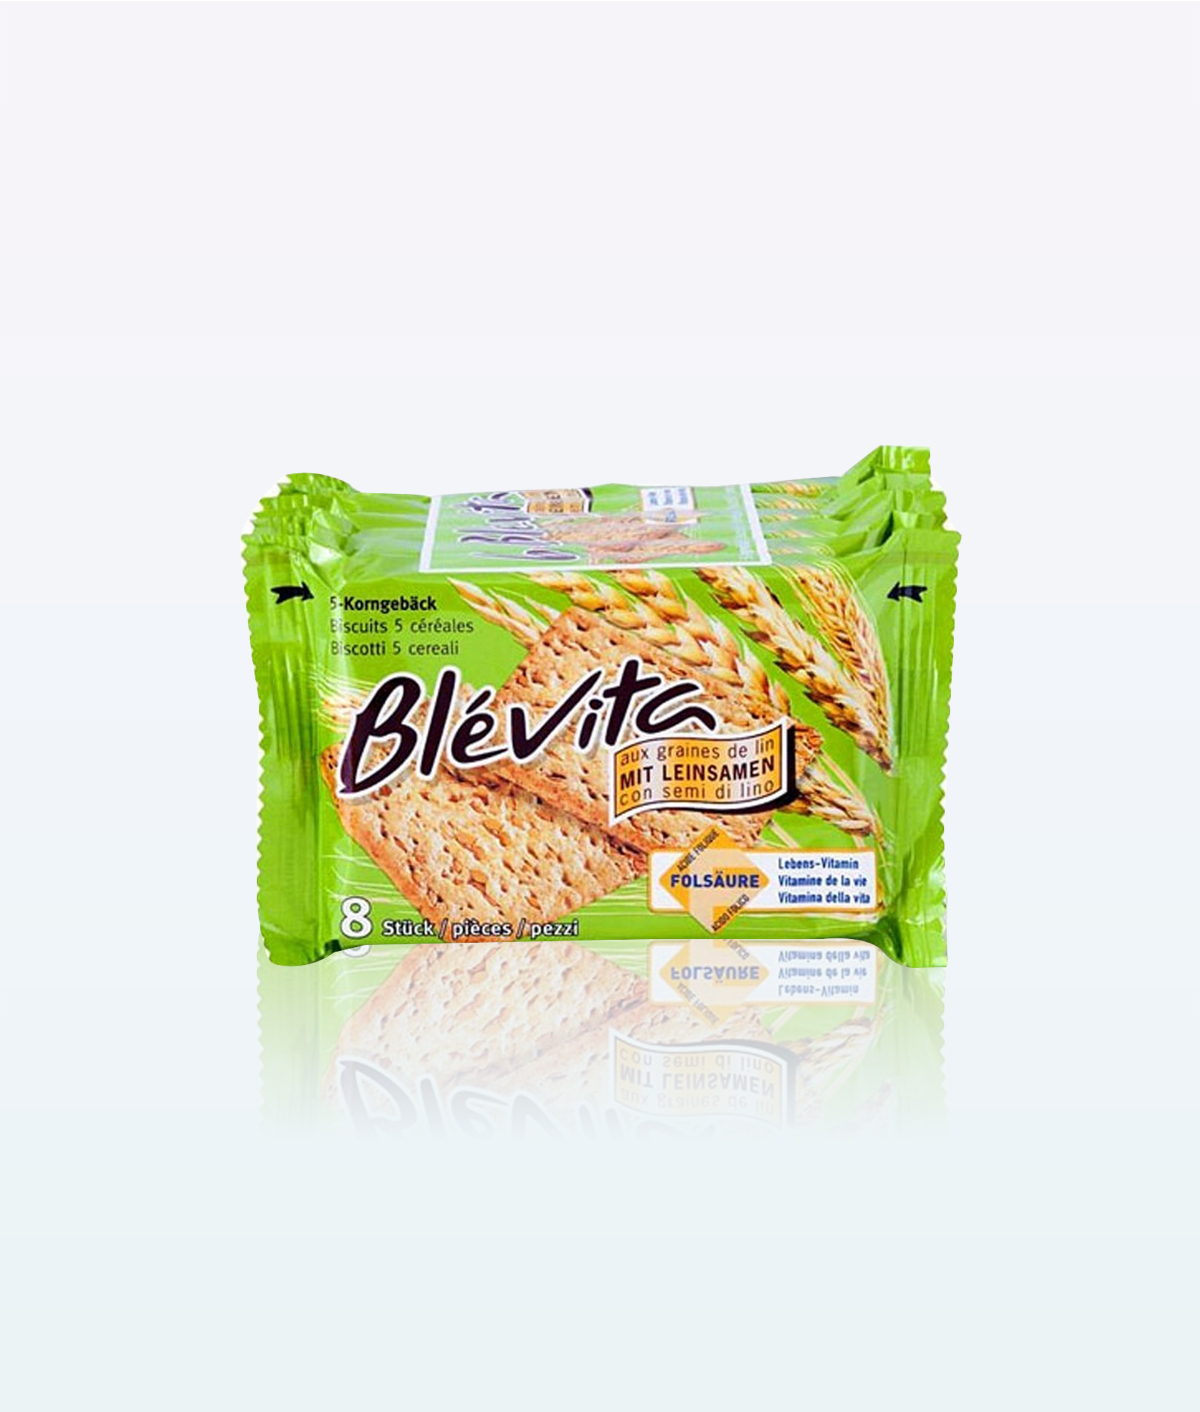 Blevita Biscuit Five Grains with Flax Seed